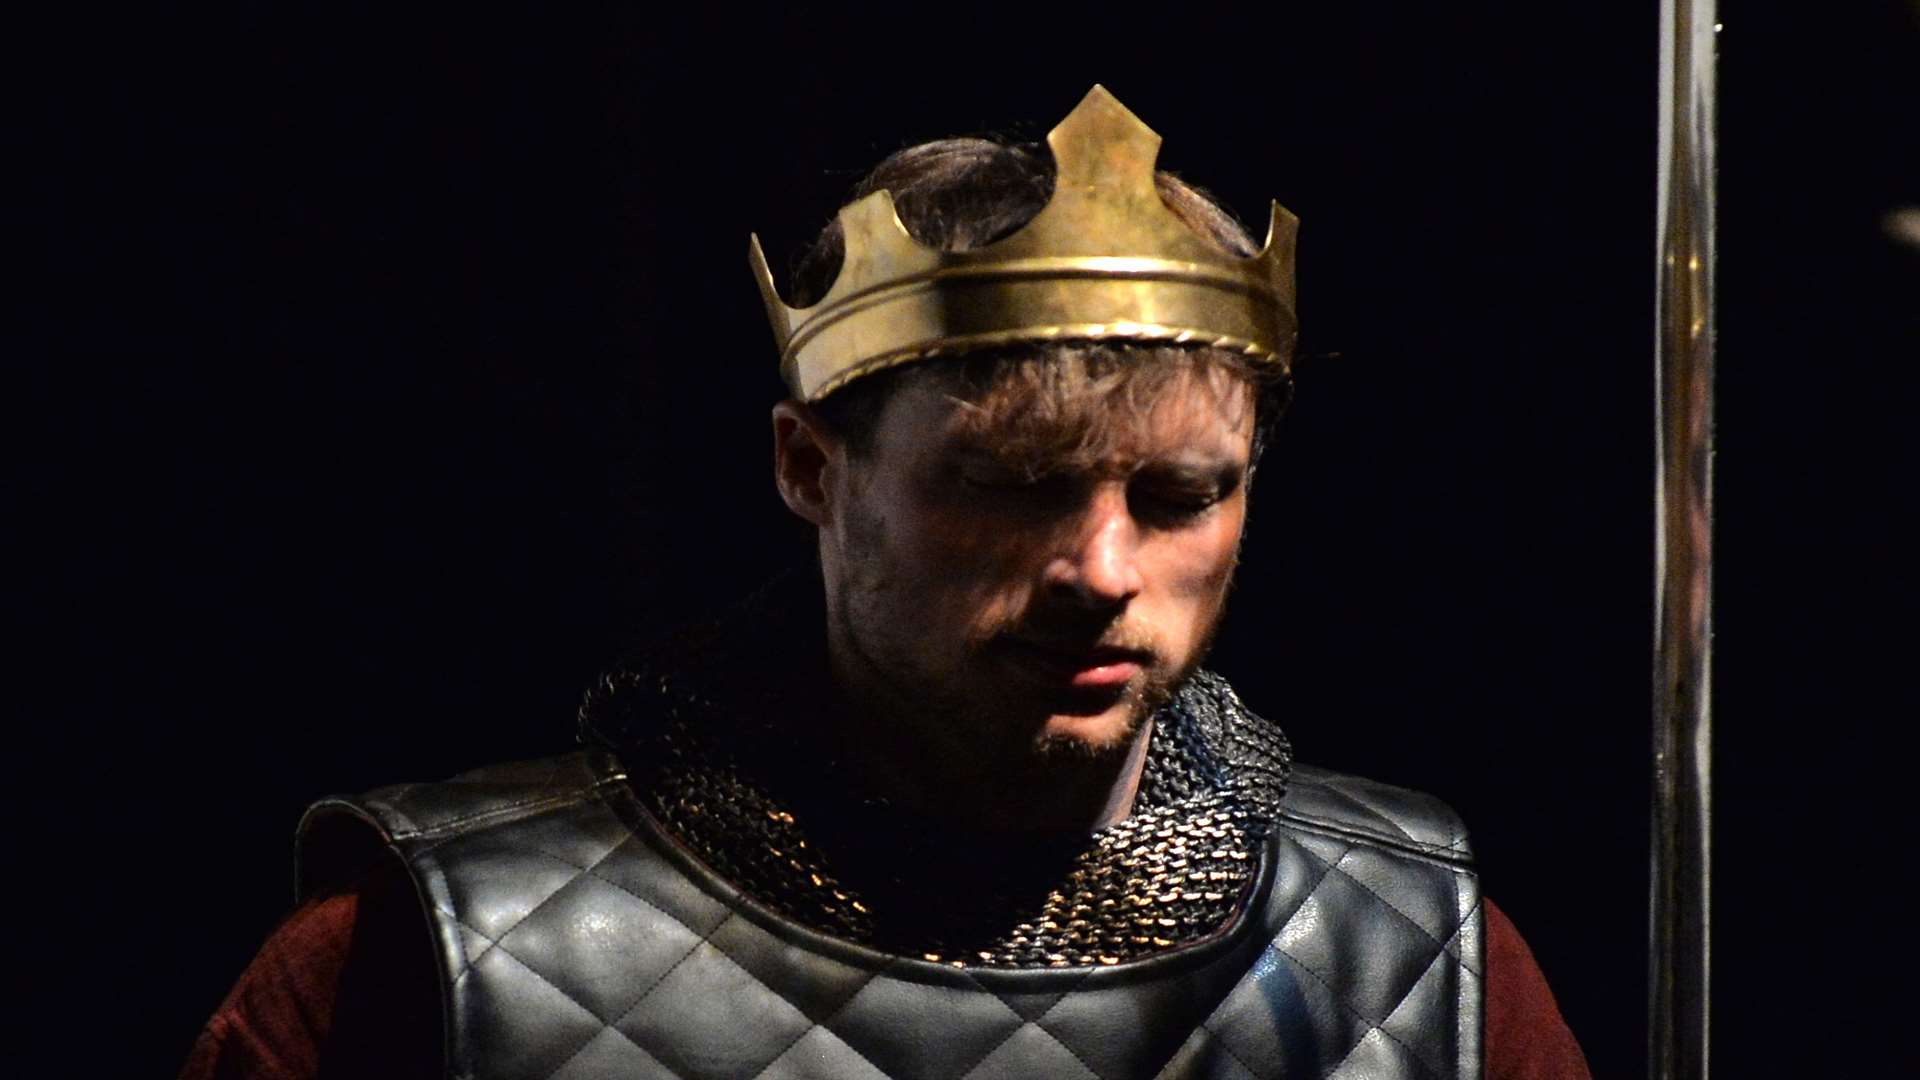 Watch an adaptation of King Arthur by Michael Morpurgo at the EM Forster Theatre